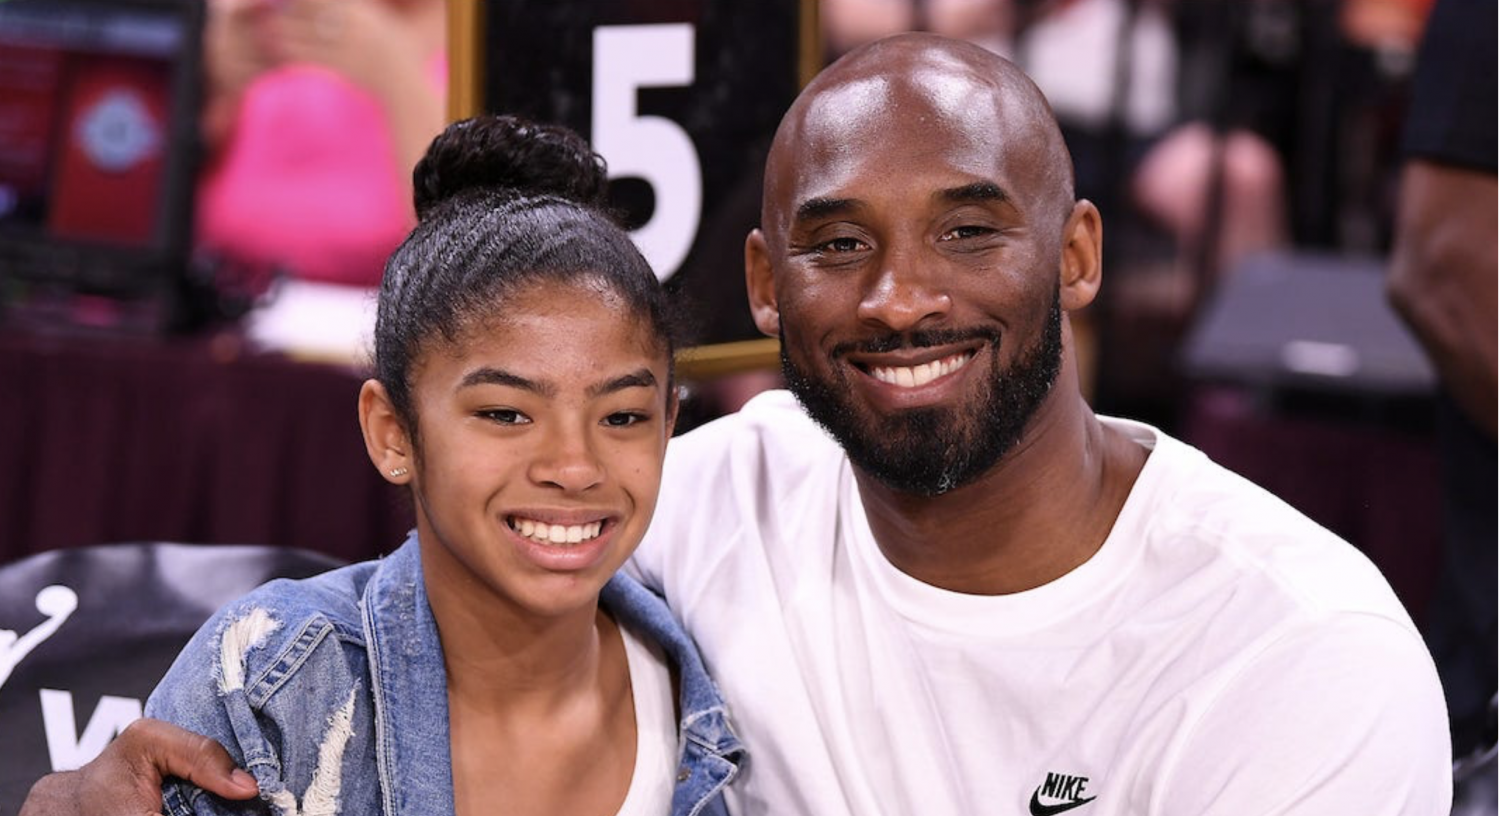 Kobe Bryant with his daughter Gianna at the WNBA All Star Game at Mandalay Bay Events Center in Las Vegas in July 2019. Stephen R. Sylvanie-USA TODAY via Reuters